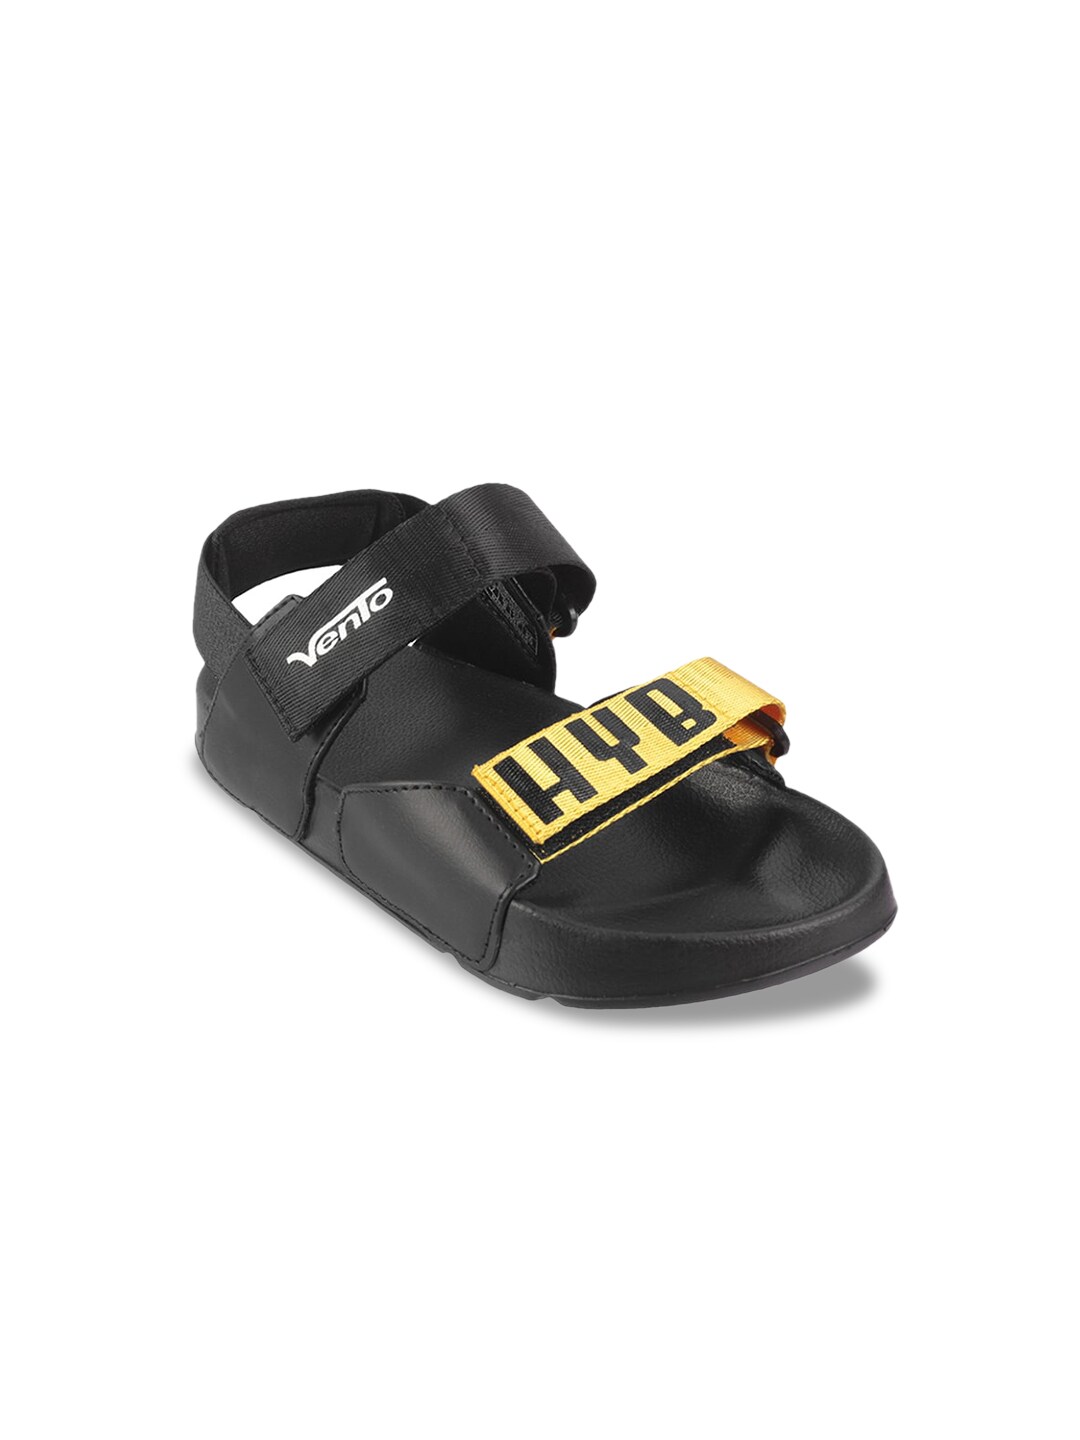 Vento Unisex Black & Yellow Solid Sports Sandals Price in India